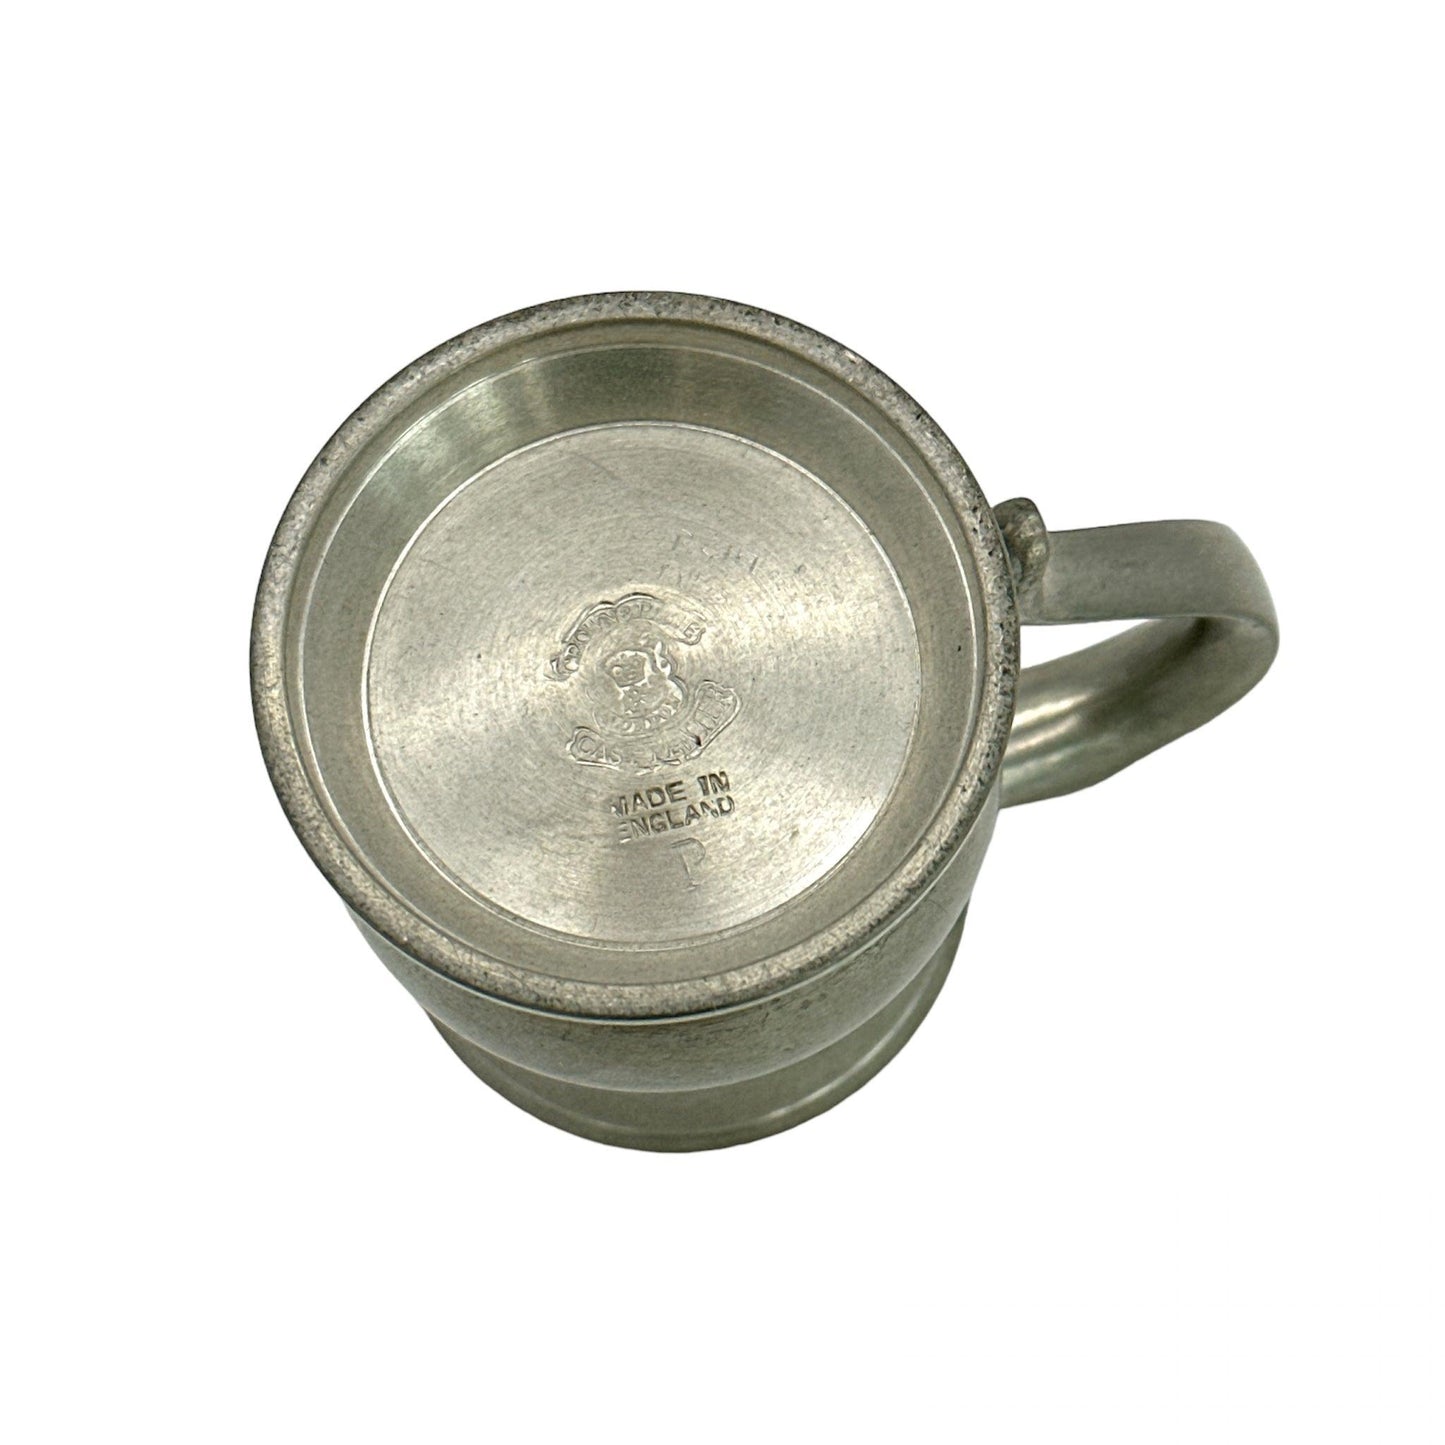 Miniature Cast Pewter Tankard: Finely Crafted Vintage Collectible for Collectors | Buy Online